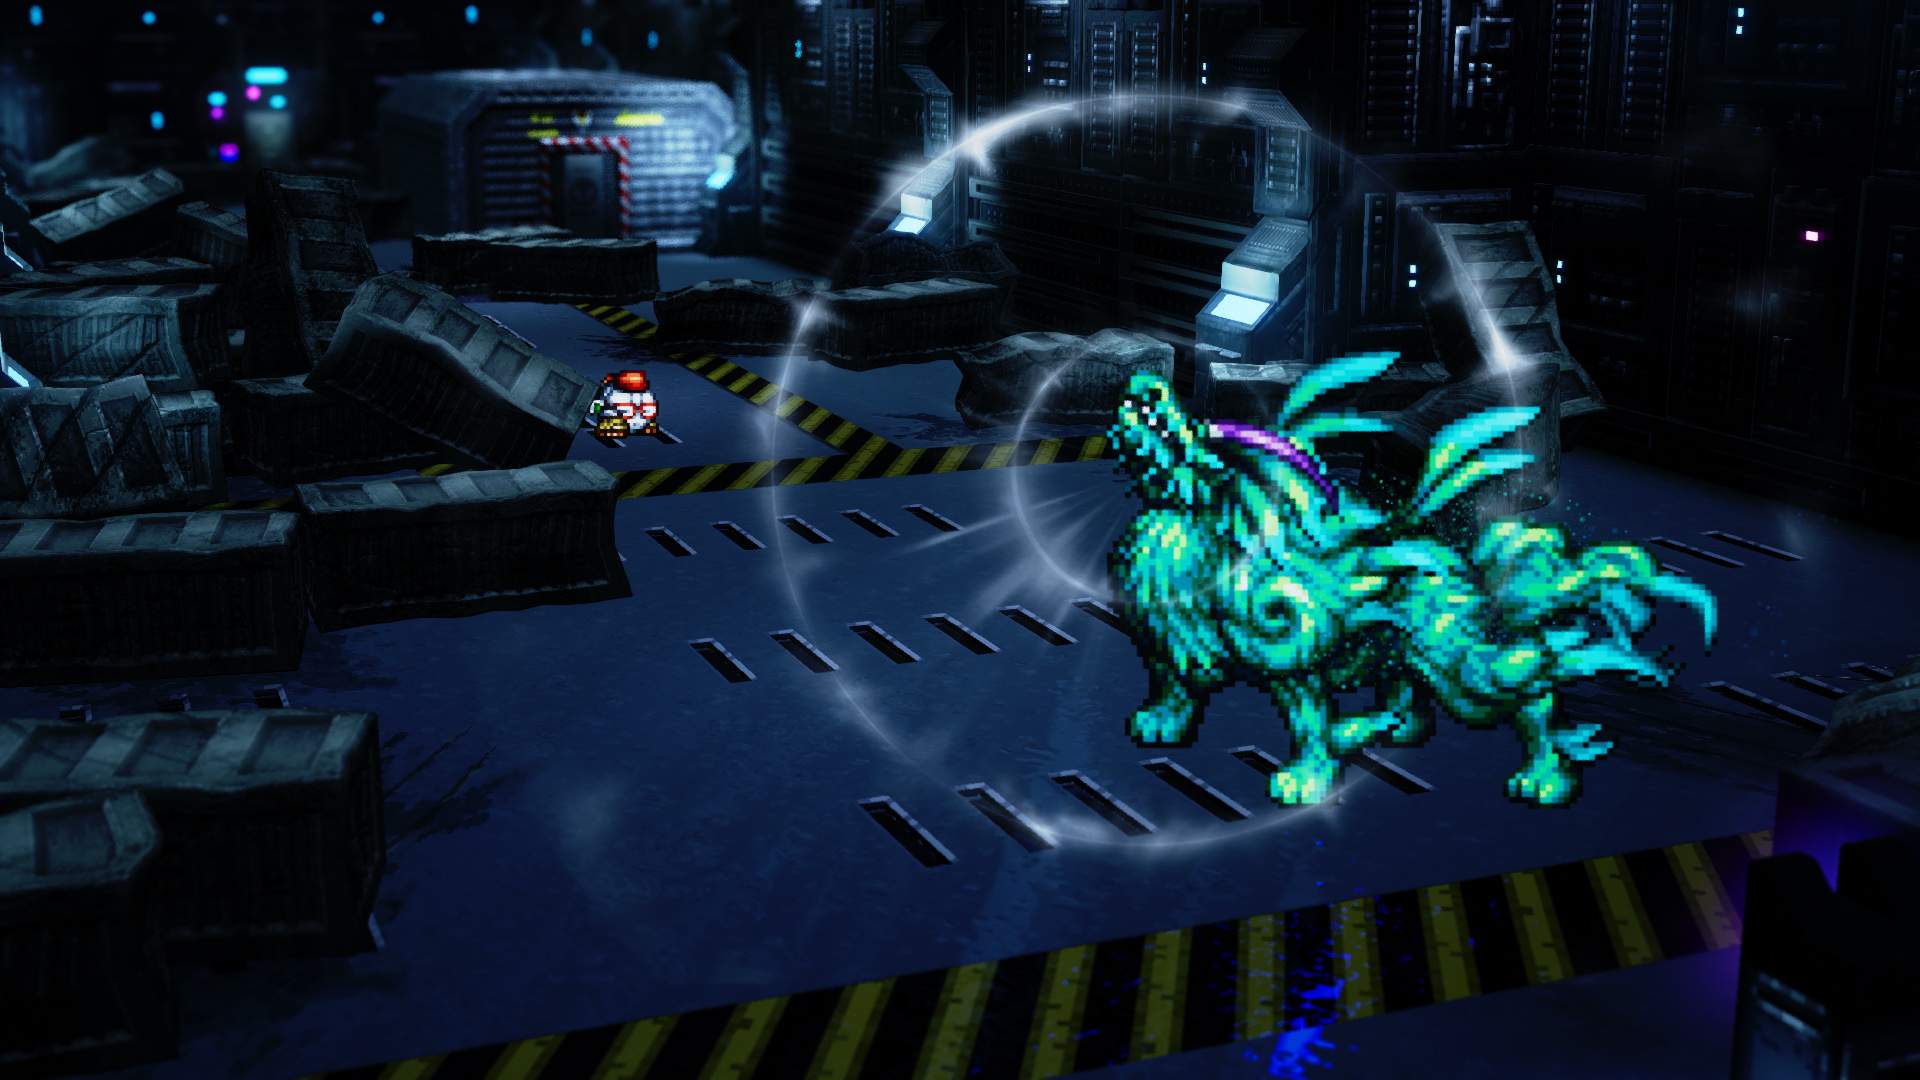 Character from the Distant Future in a spaceship hangar confronted by a large green creature.